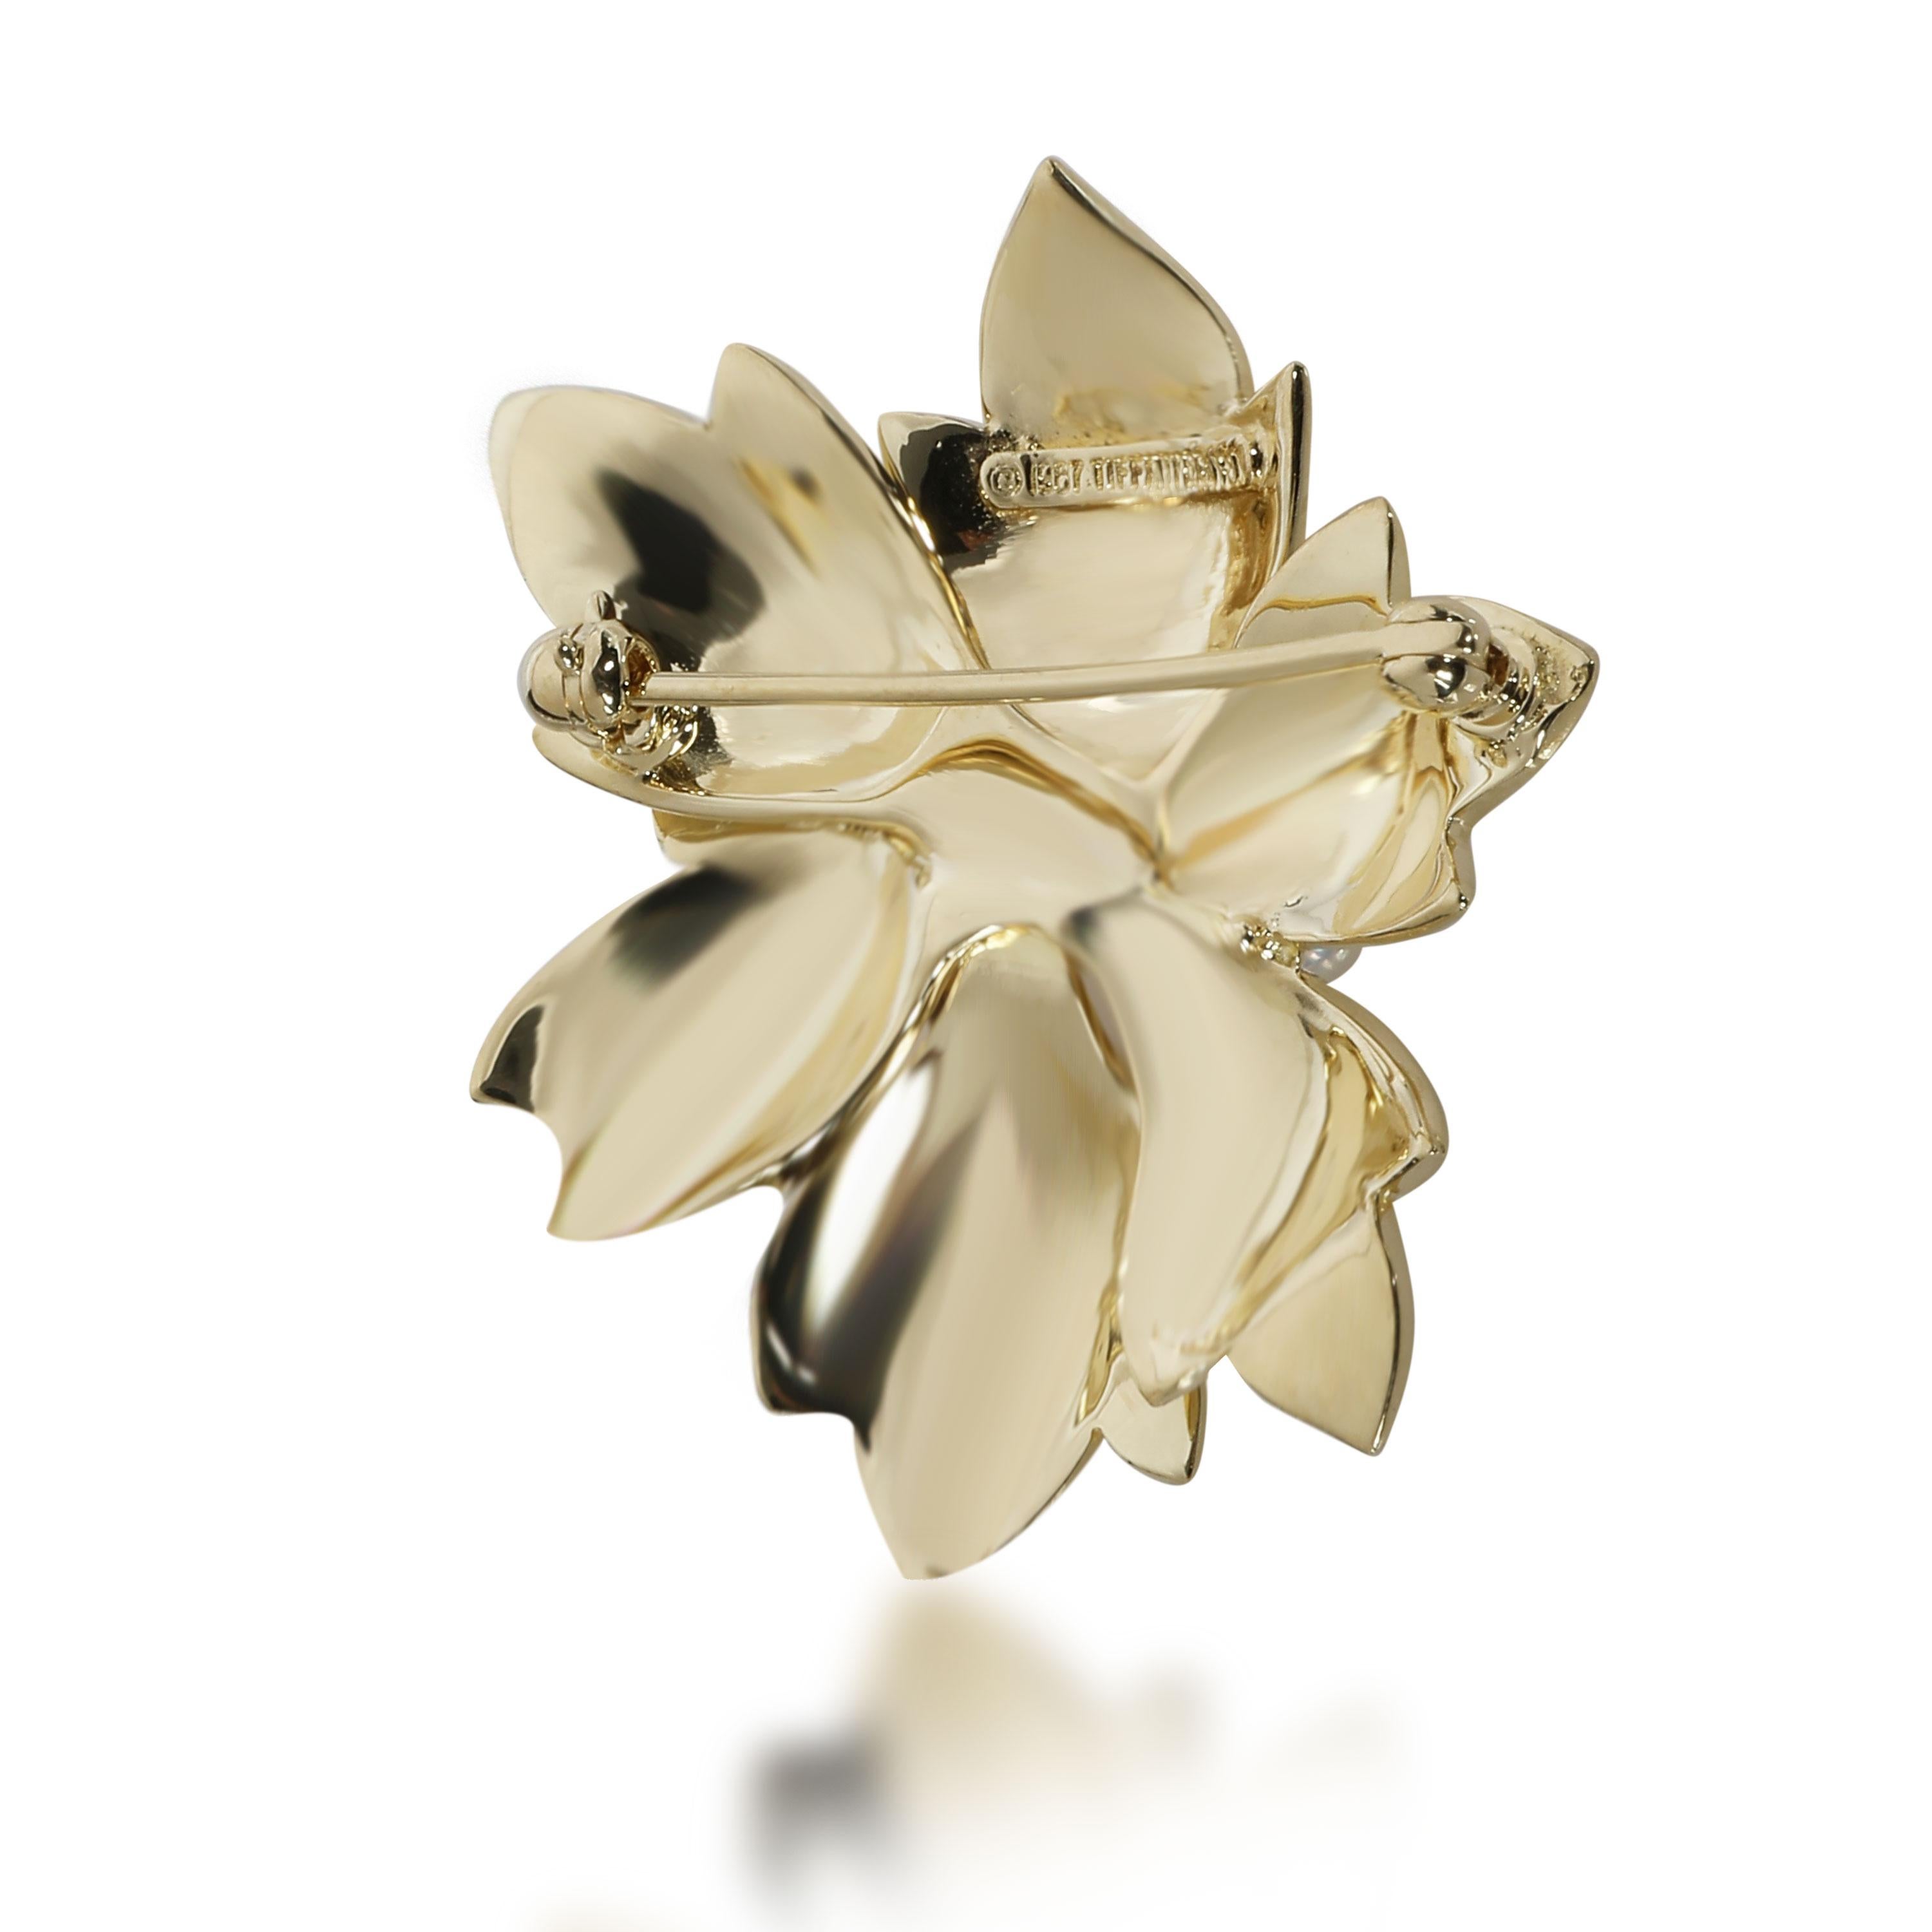 Tiffany & Co. Vintage Pearl Poinsettia Brooch in 18K Yellow Gold

PRIMARY DETAILS
SKU: 108038
Listing Title: Tiffany & Co. Vintage Pearl Poinsettia Brooch in 18K Yellow Gold
Condition Description: In excellent condition and recently polished.
Brand: